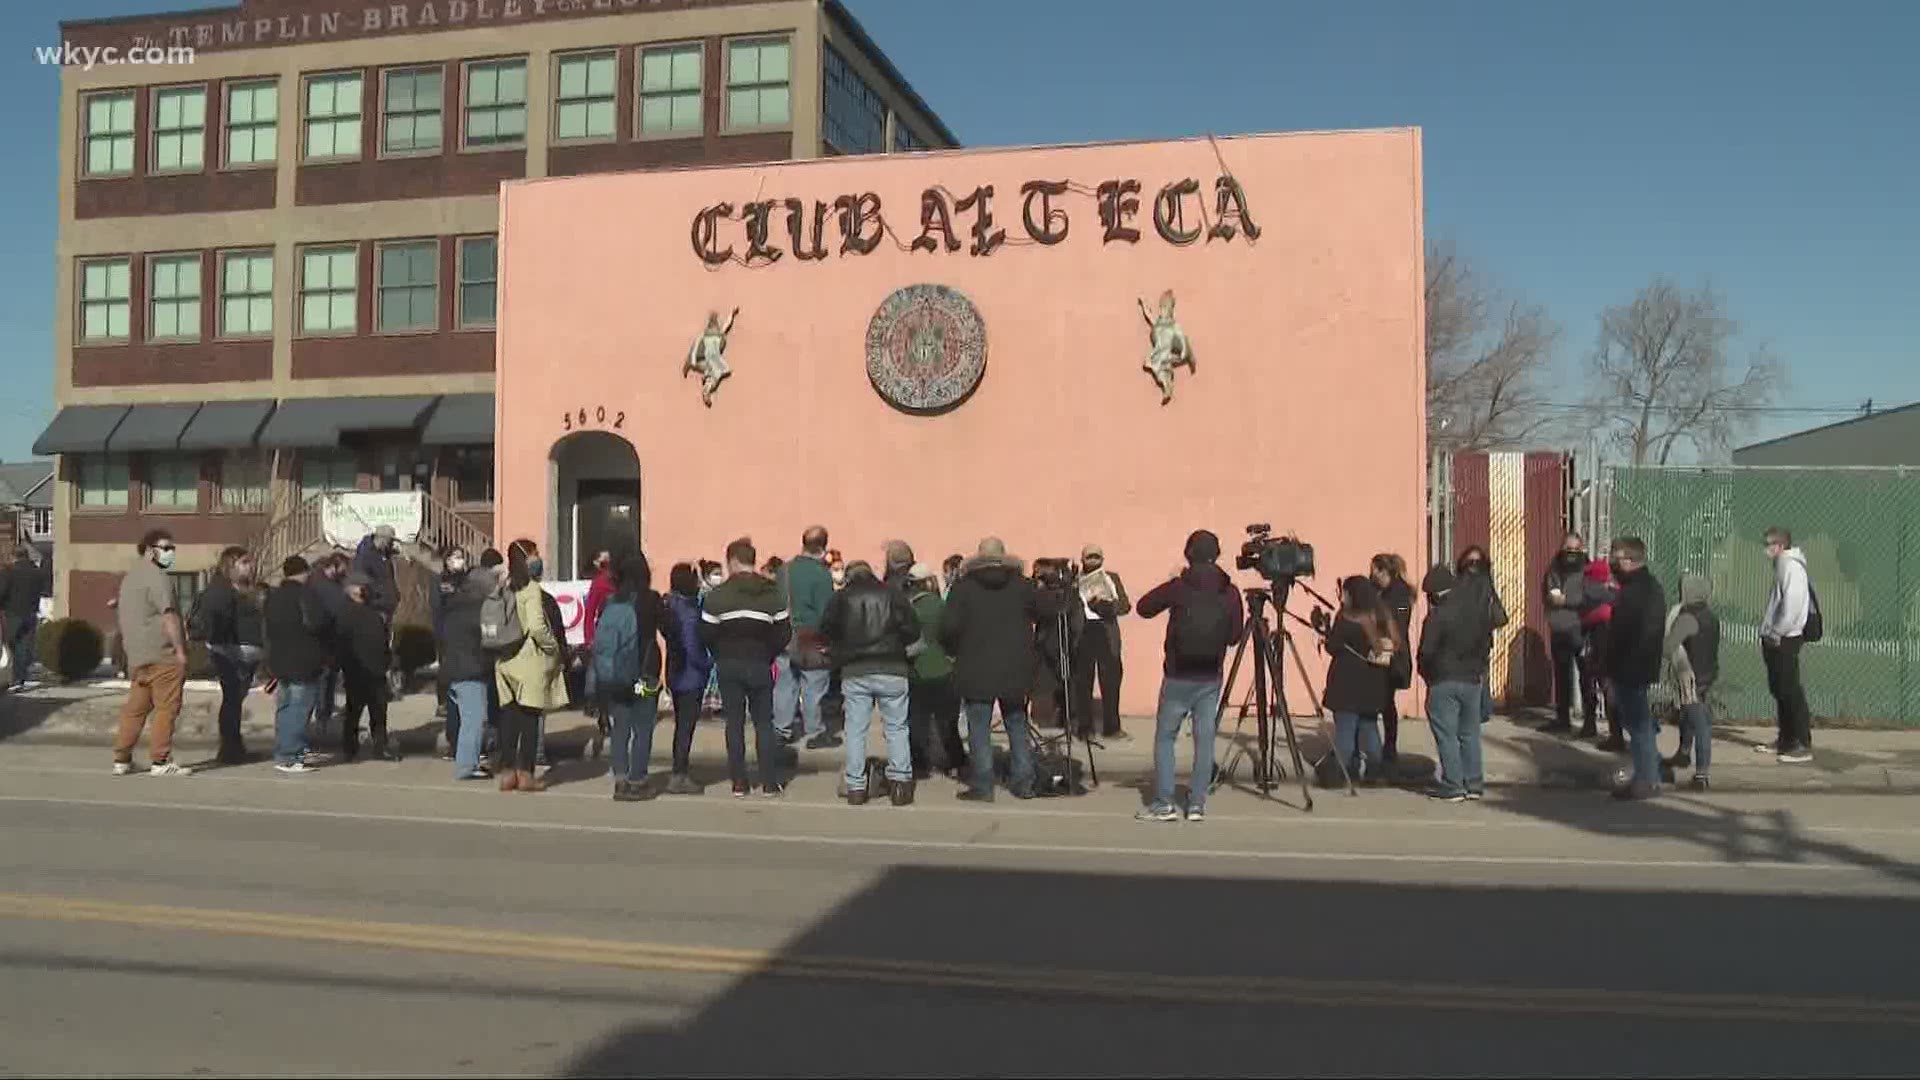 Club Azteca, in the Gordon square area, is in danger of being demolished. January Keaton has the story from local on why it's important.